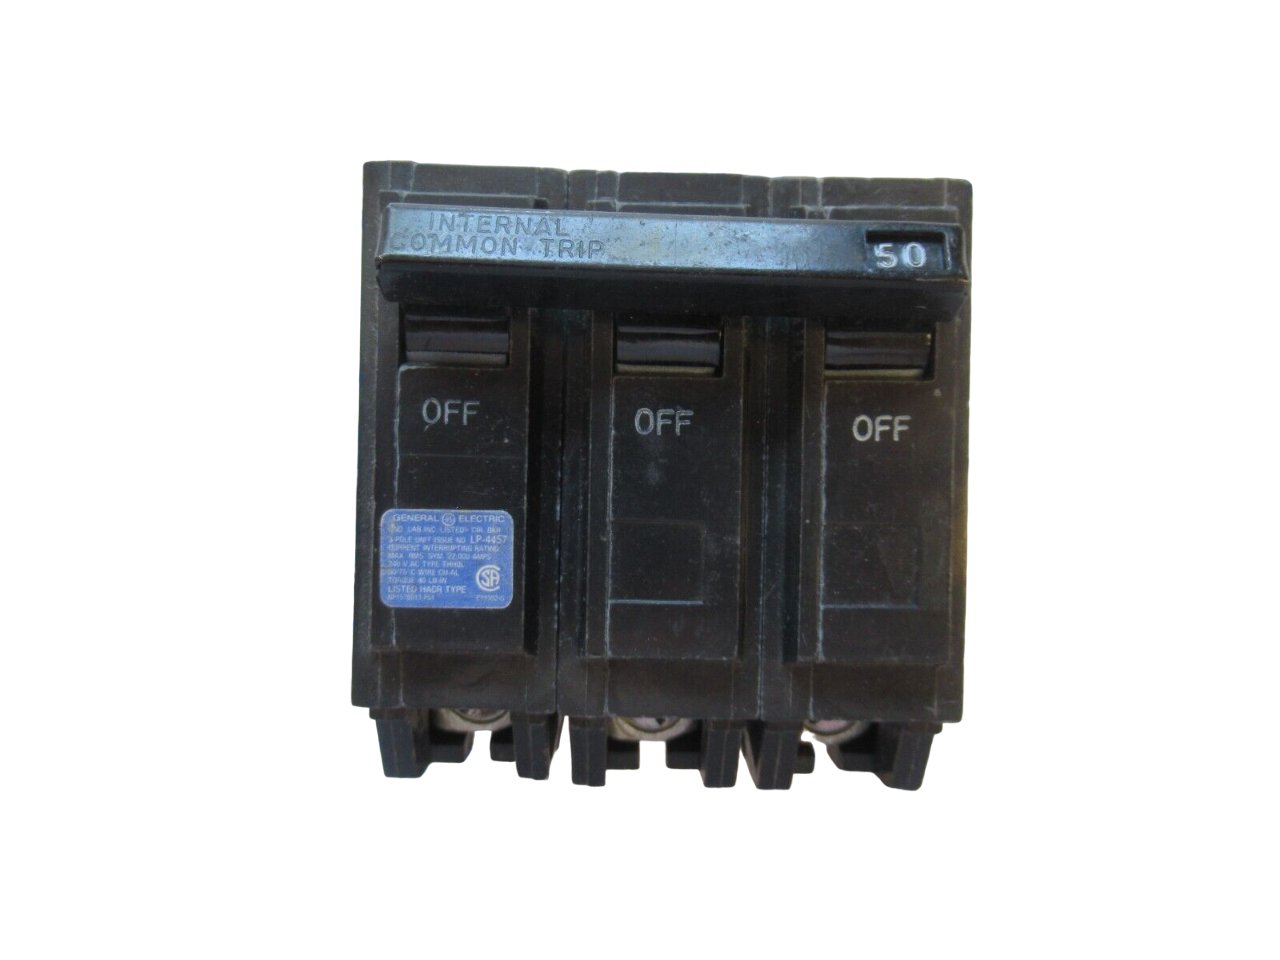 THHQL32050 - General Electrics - Molded Case Circuit Breakers
